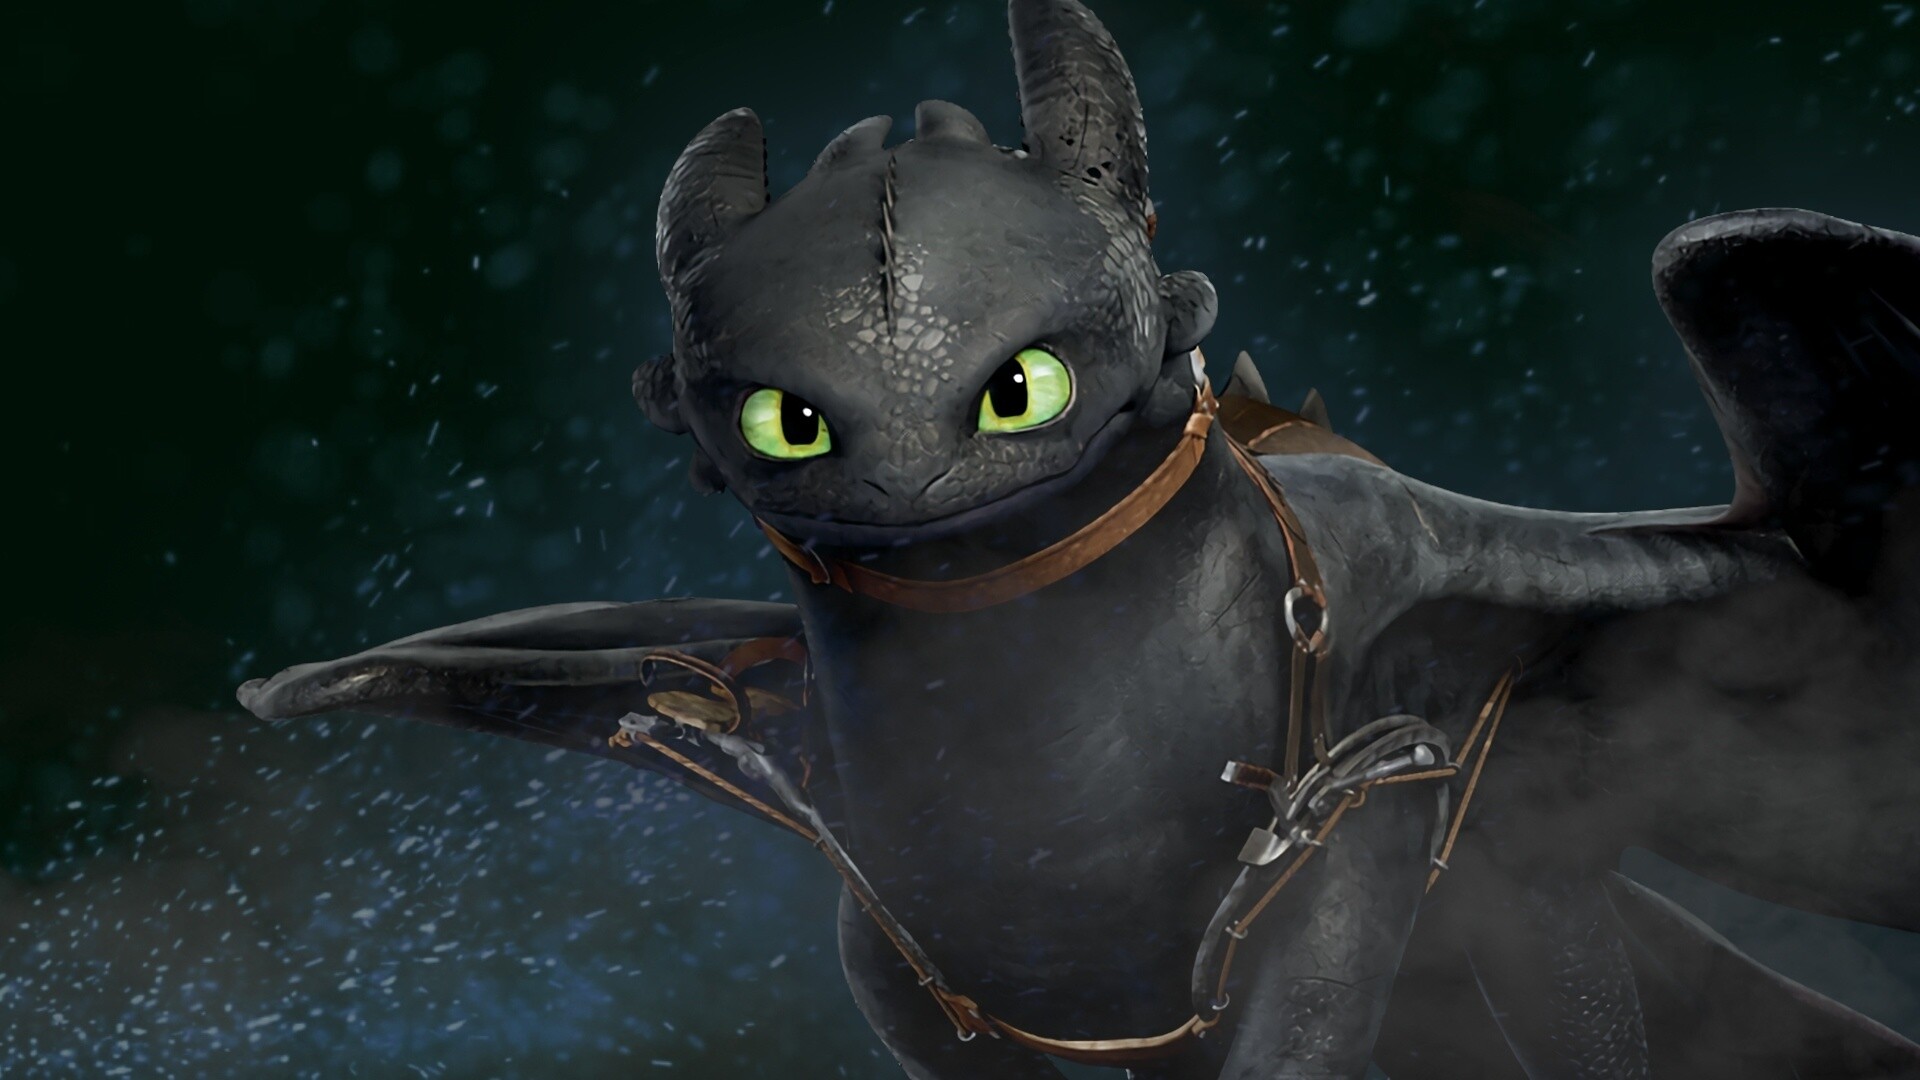 How to Train Your Dragon: The story about dragons and vikings, Toothless. 1920x1080 Full HD Wallpaper.